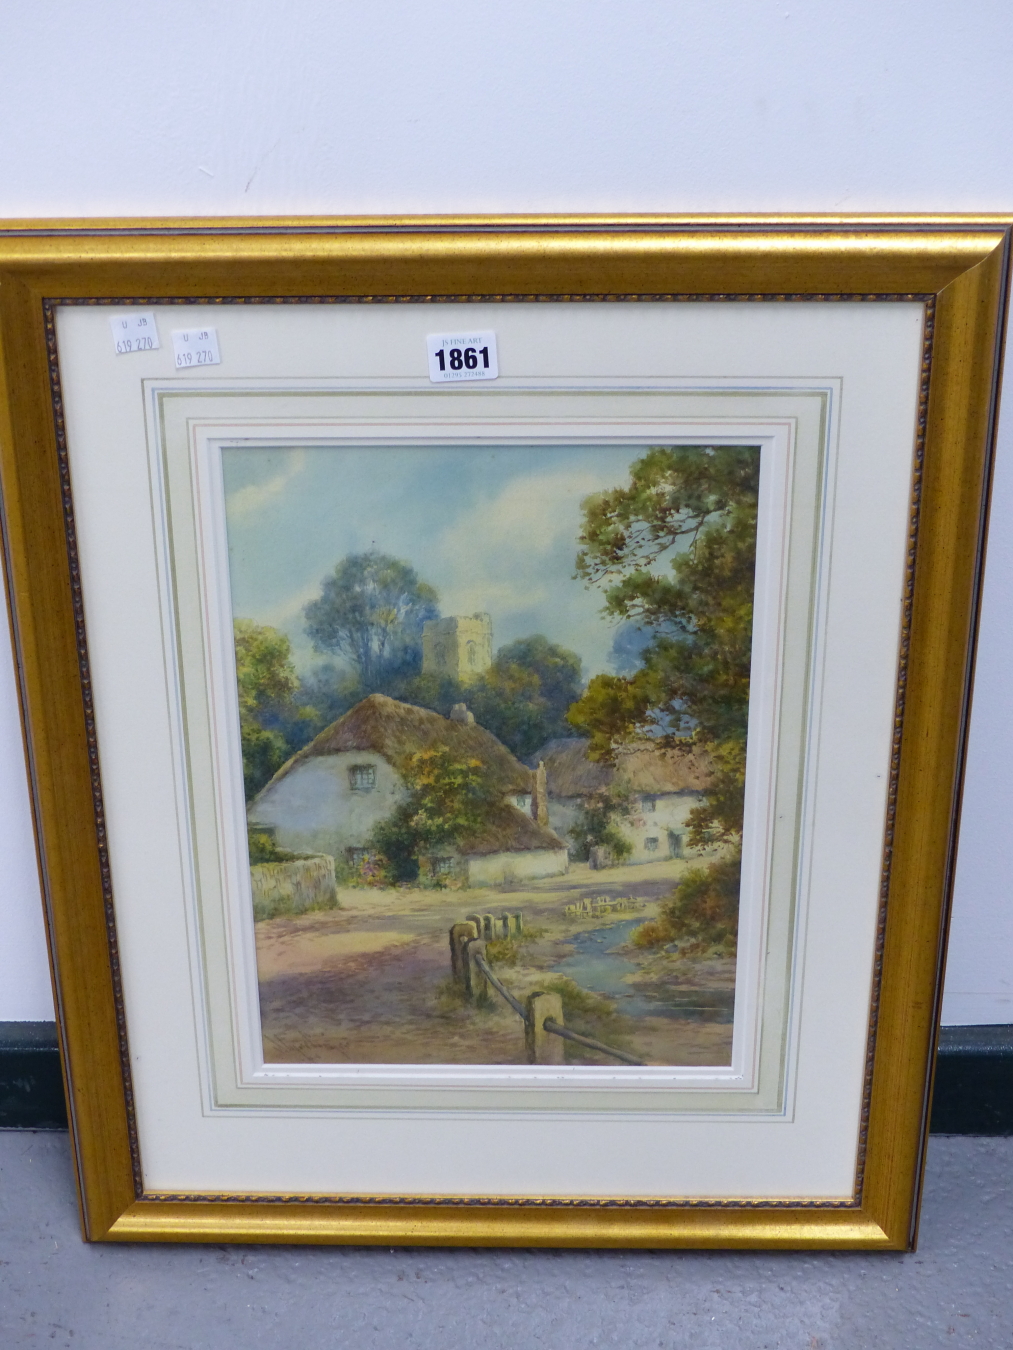 LEWIS MORTIMER (19TH/20TH CENTURY), SHIP INN, PORLOCK, SIGNED, WATERCOLOUR, 25 X 35CM, TOGETHER WITH - Image 11 of 14